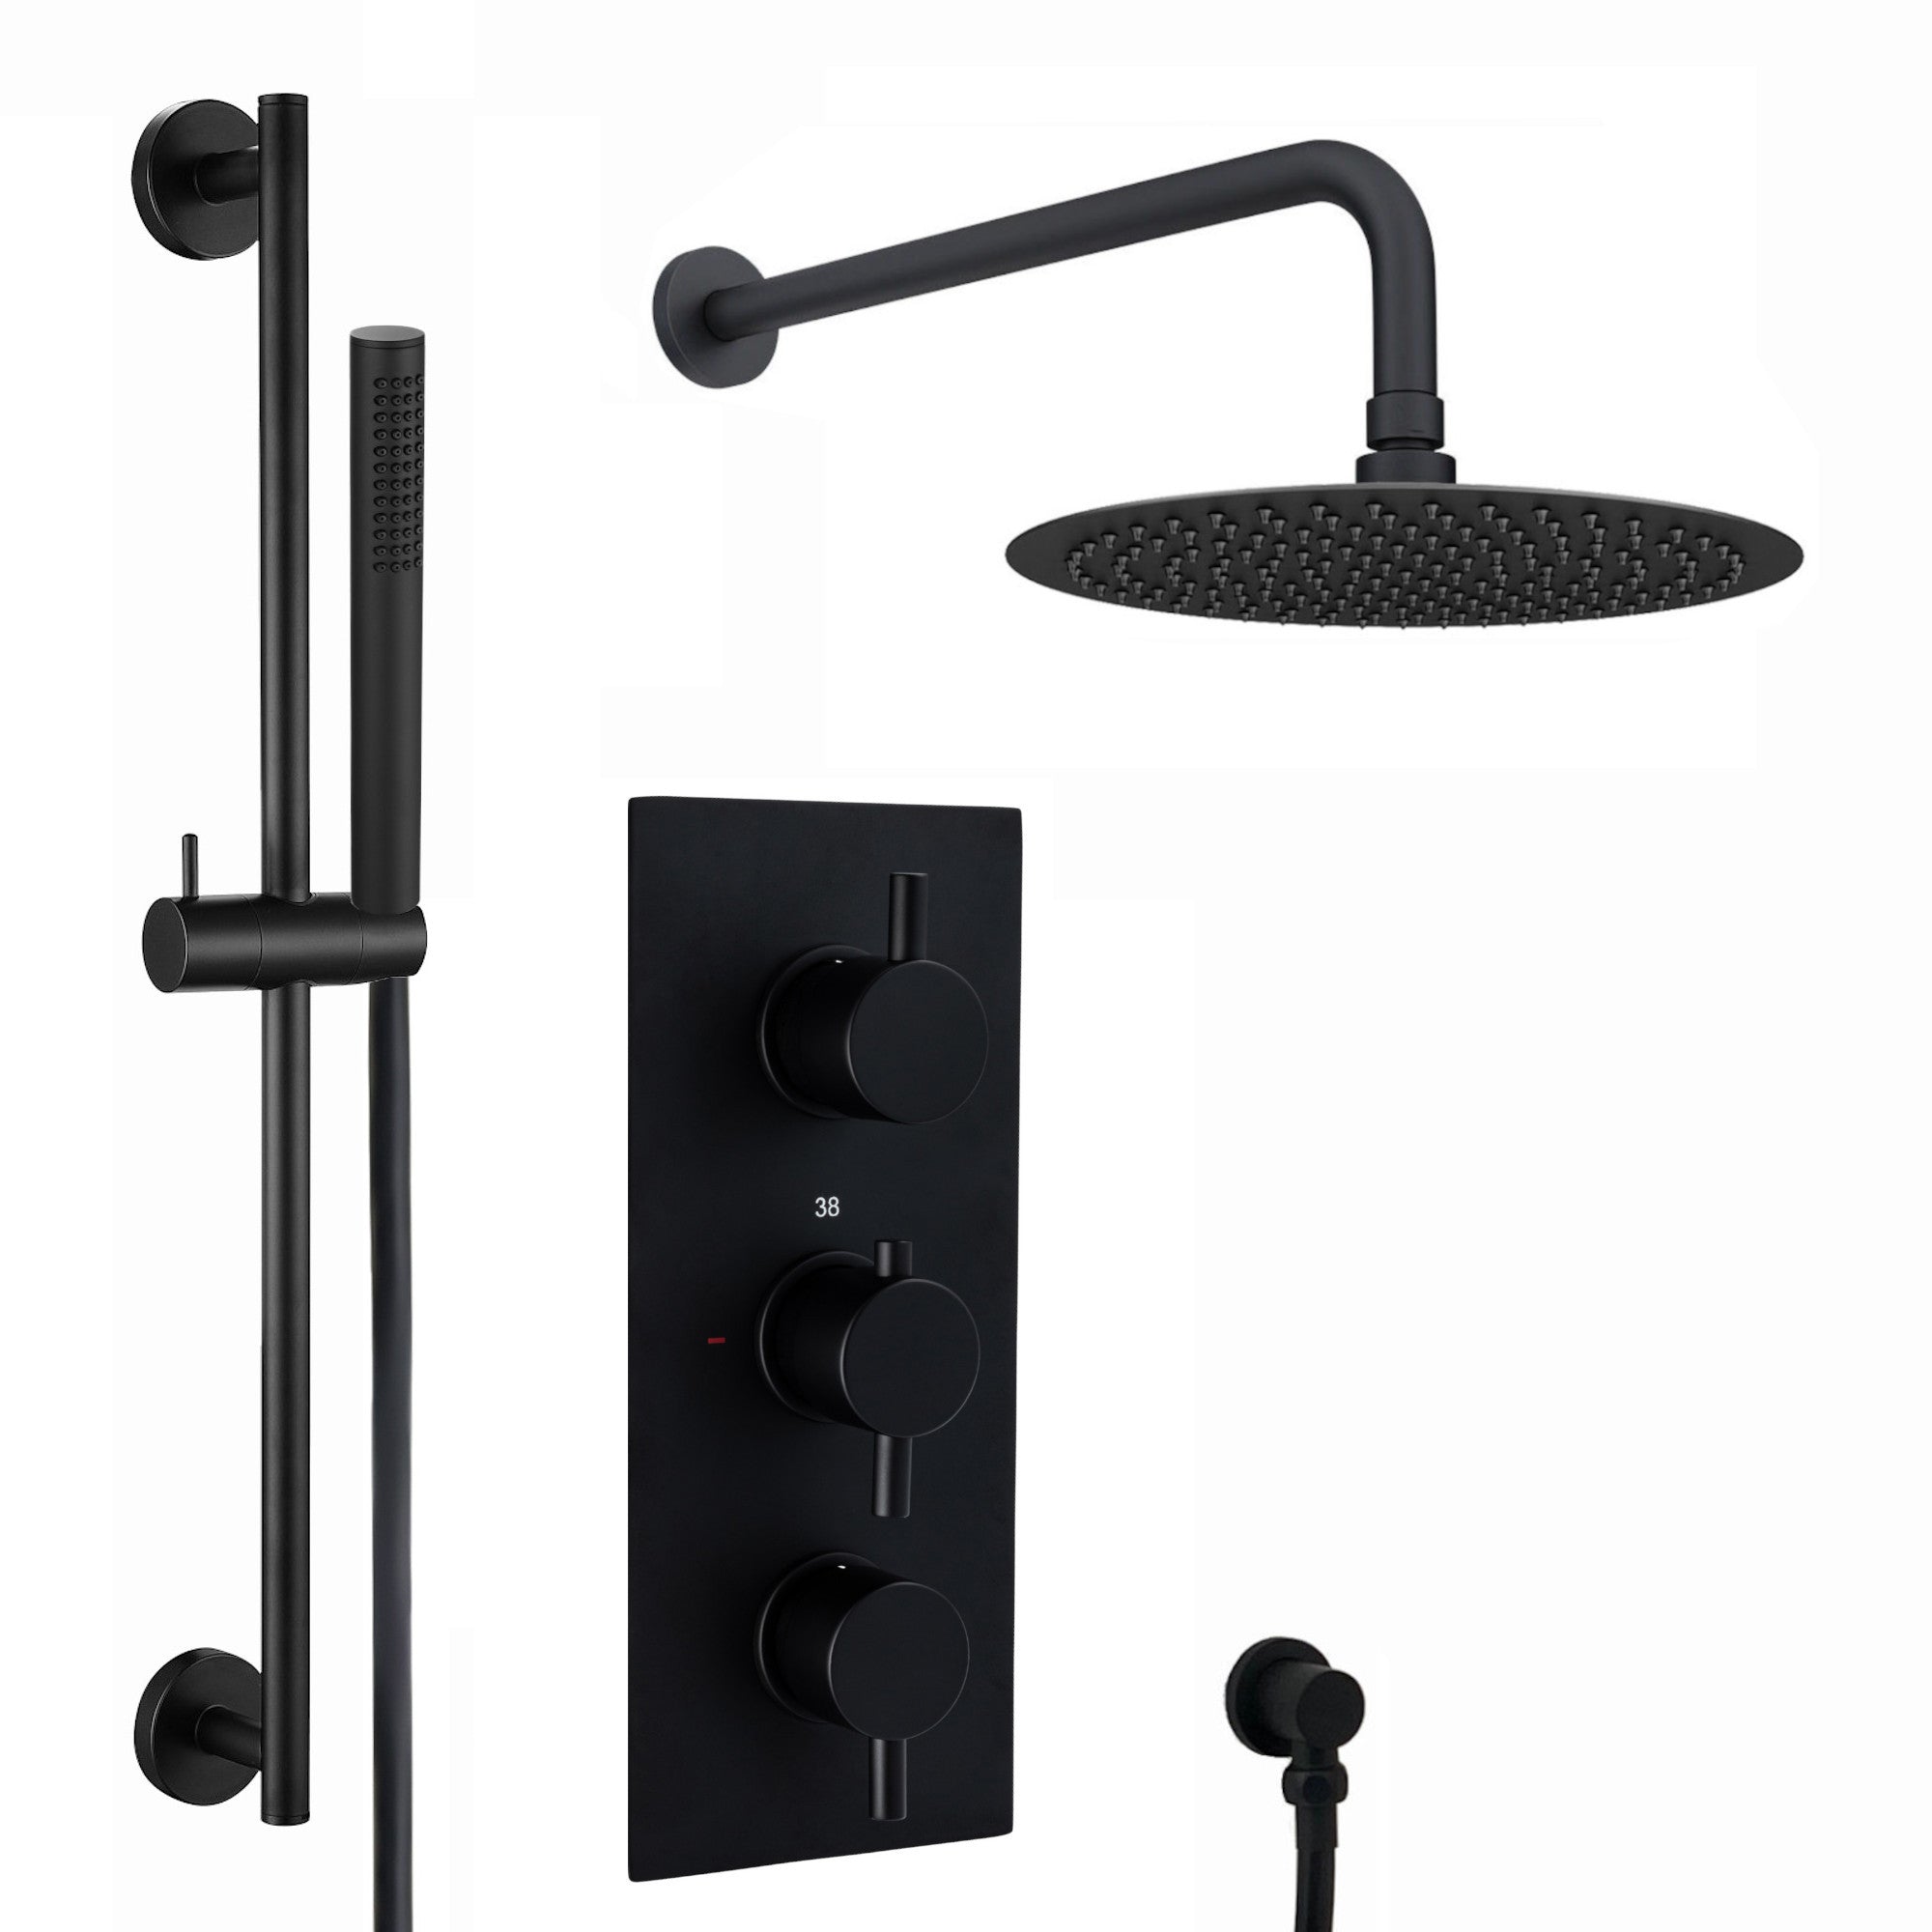 Venice Contemporary Round Concealed Thermostatic Shower Set Incl. Triple Valve, Wall Fixed 8" Shower Head, Slider Rail Kit - Matte Black (2 Outlet)